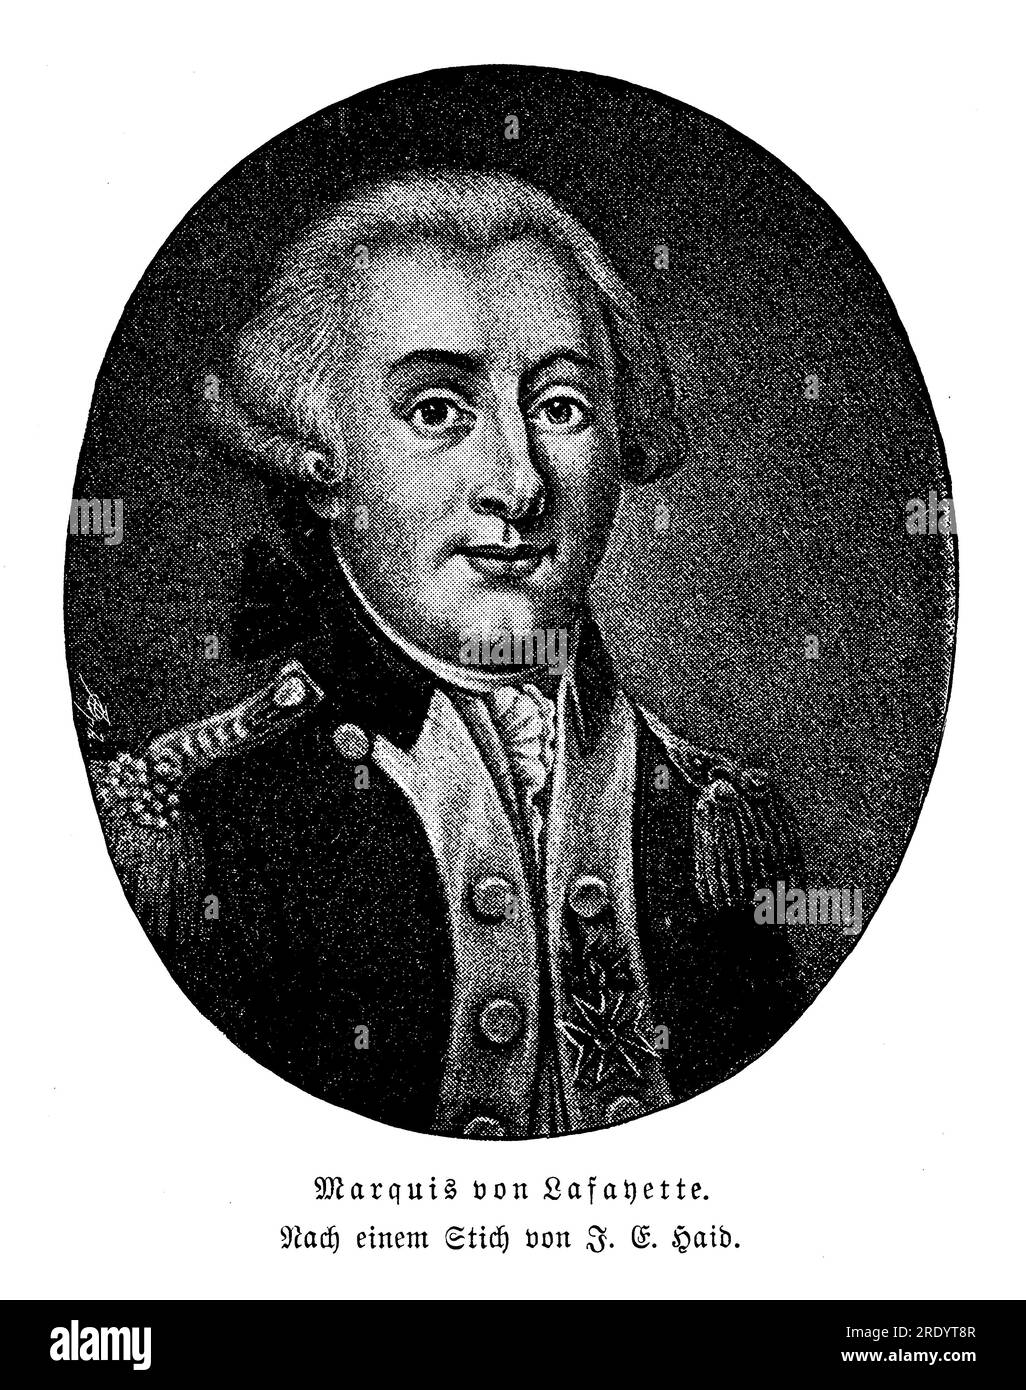 Marquis de Lafayette, full name Marie-Joseph Paul Yves Roch Gilbert du Motier, Marquis de Lafayette (1757-1834), was a French military officer and statesman who played a significant role in the American Revolutionary War and the French Revolution. Inspired by the ideals of liberty and equality, Lafayette joined the American cause and served as a key ally to General George Washington Stock Photo